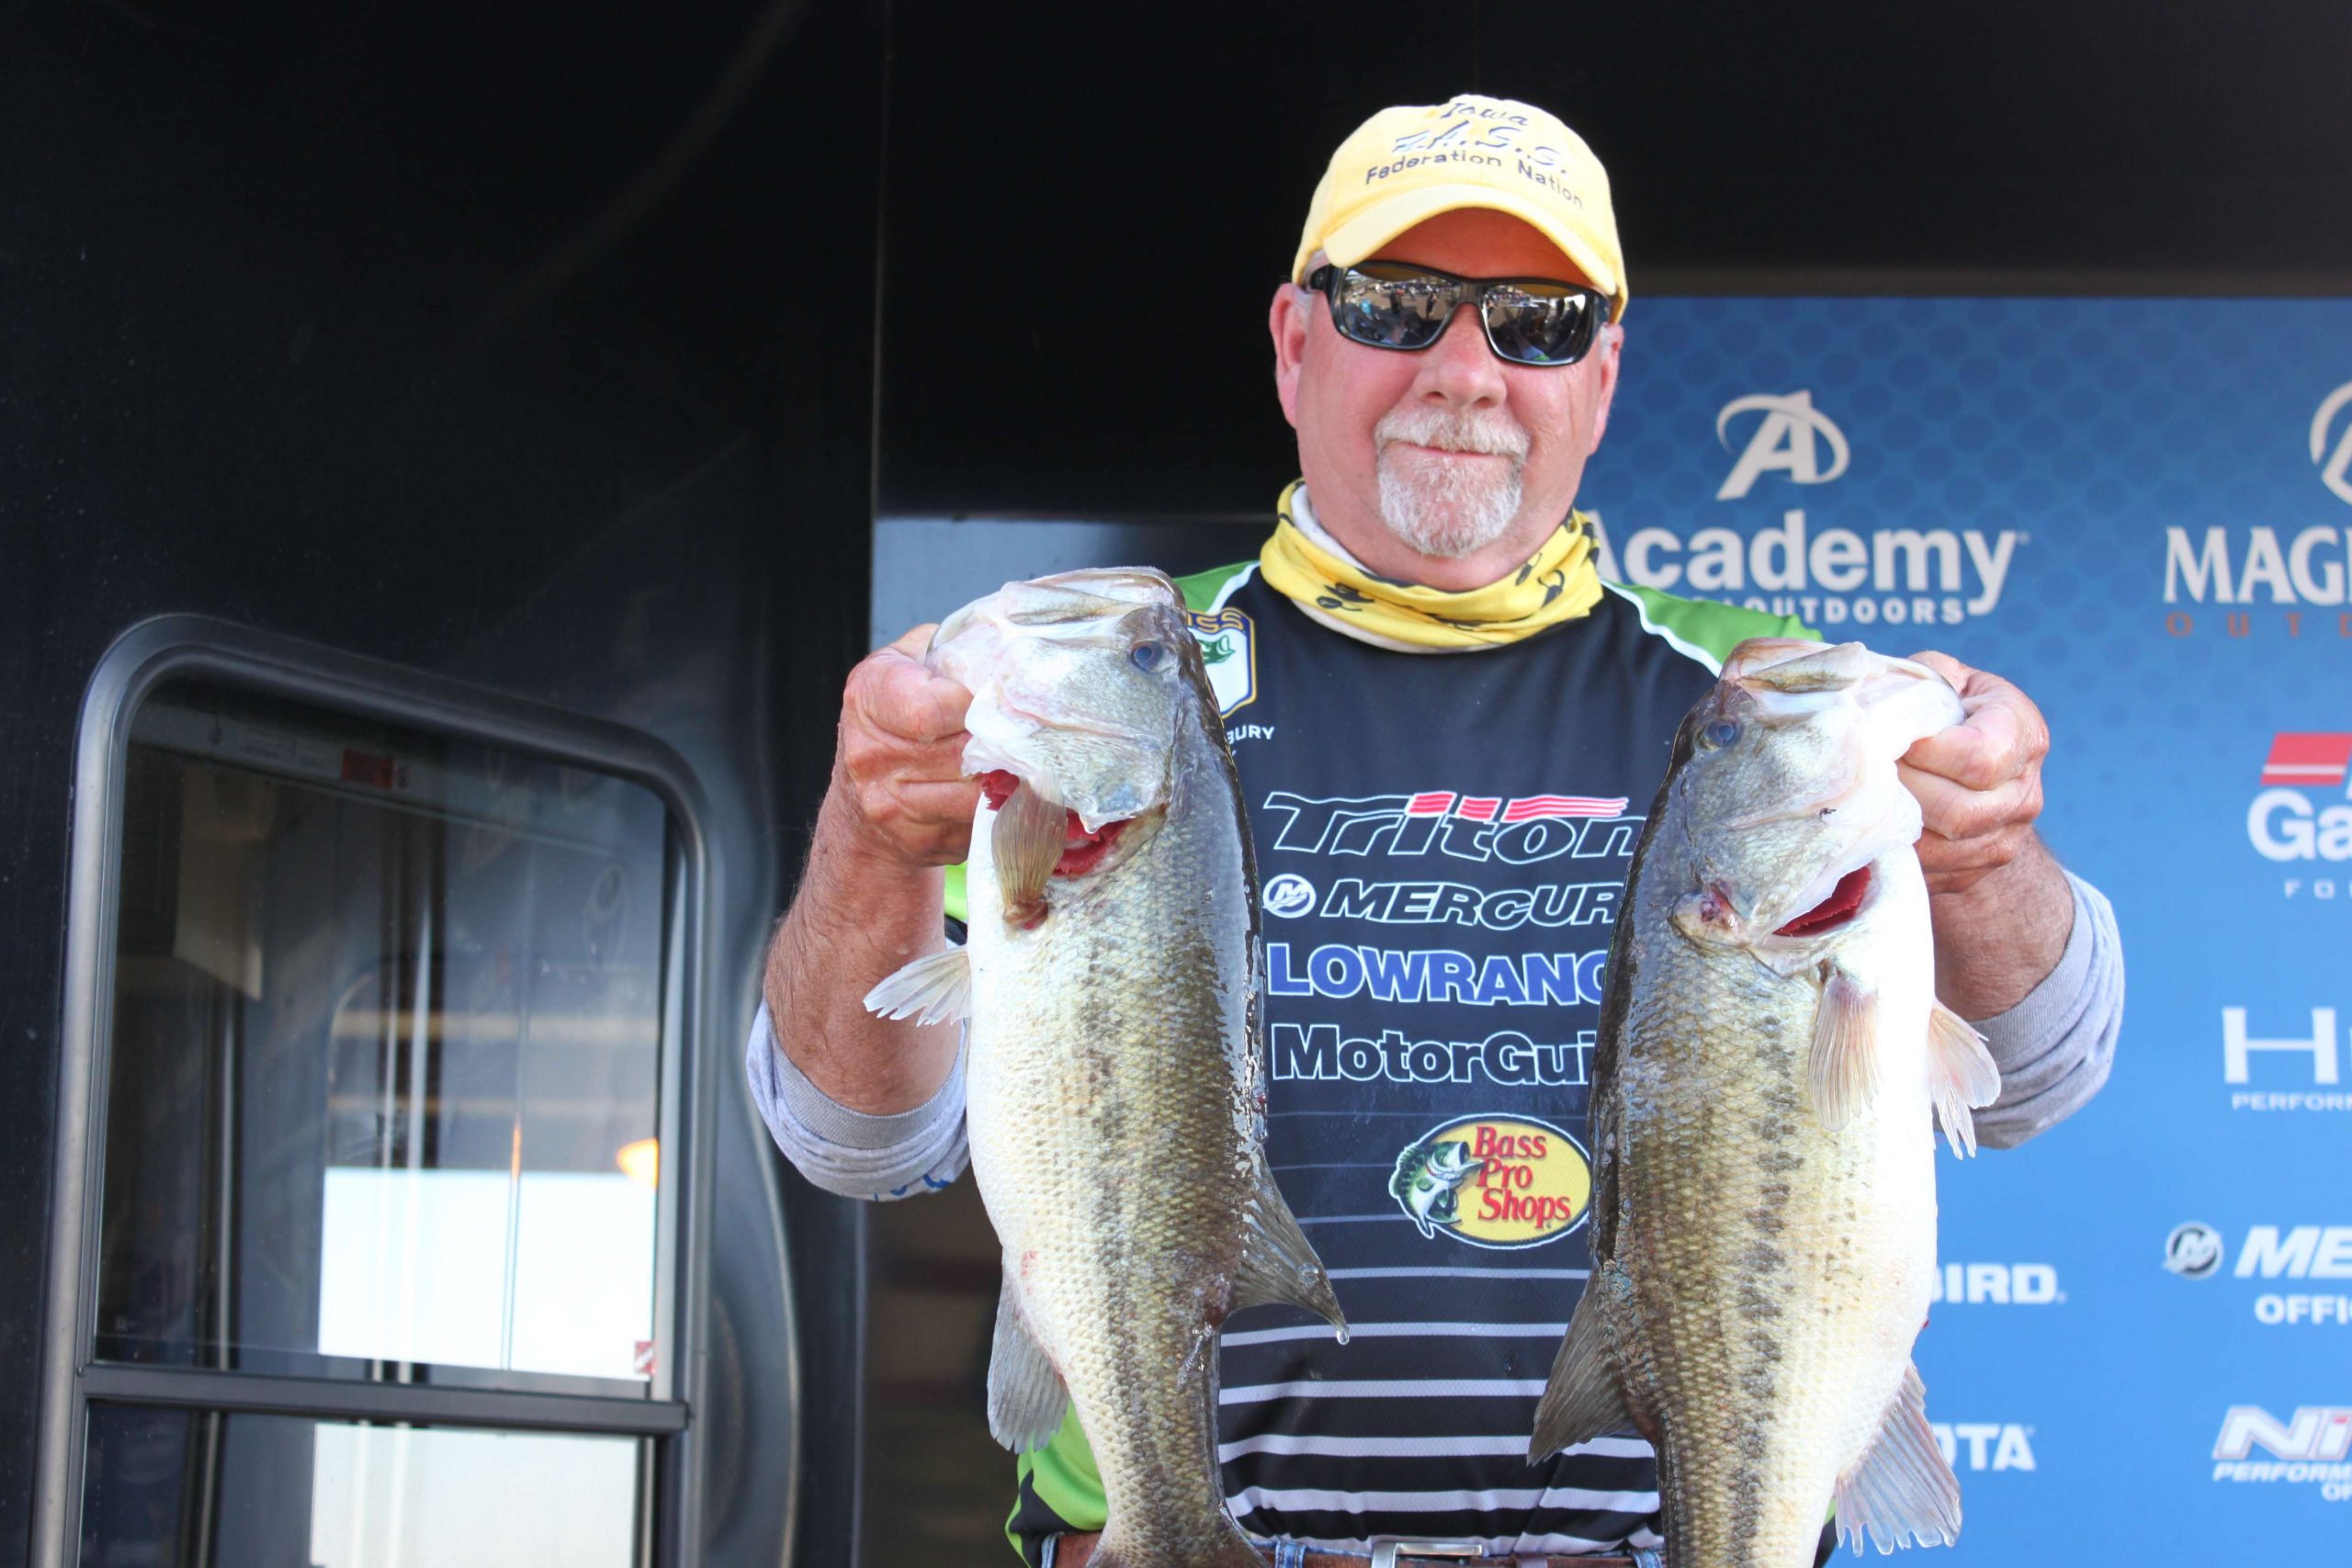 Ron Kingsbury of Team Iowa is just ahead of Roth in second place with a 22-pound, five-bass limit.